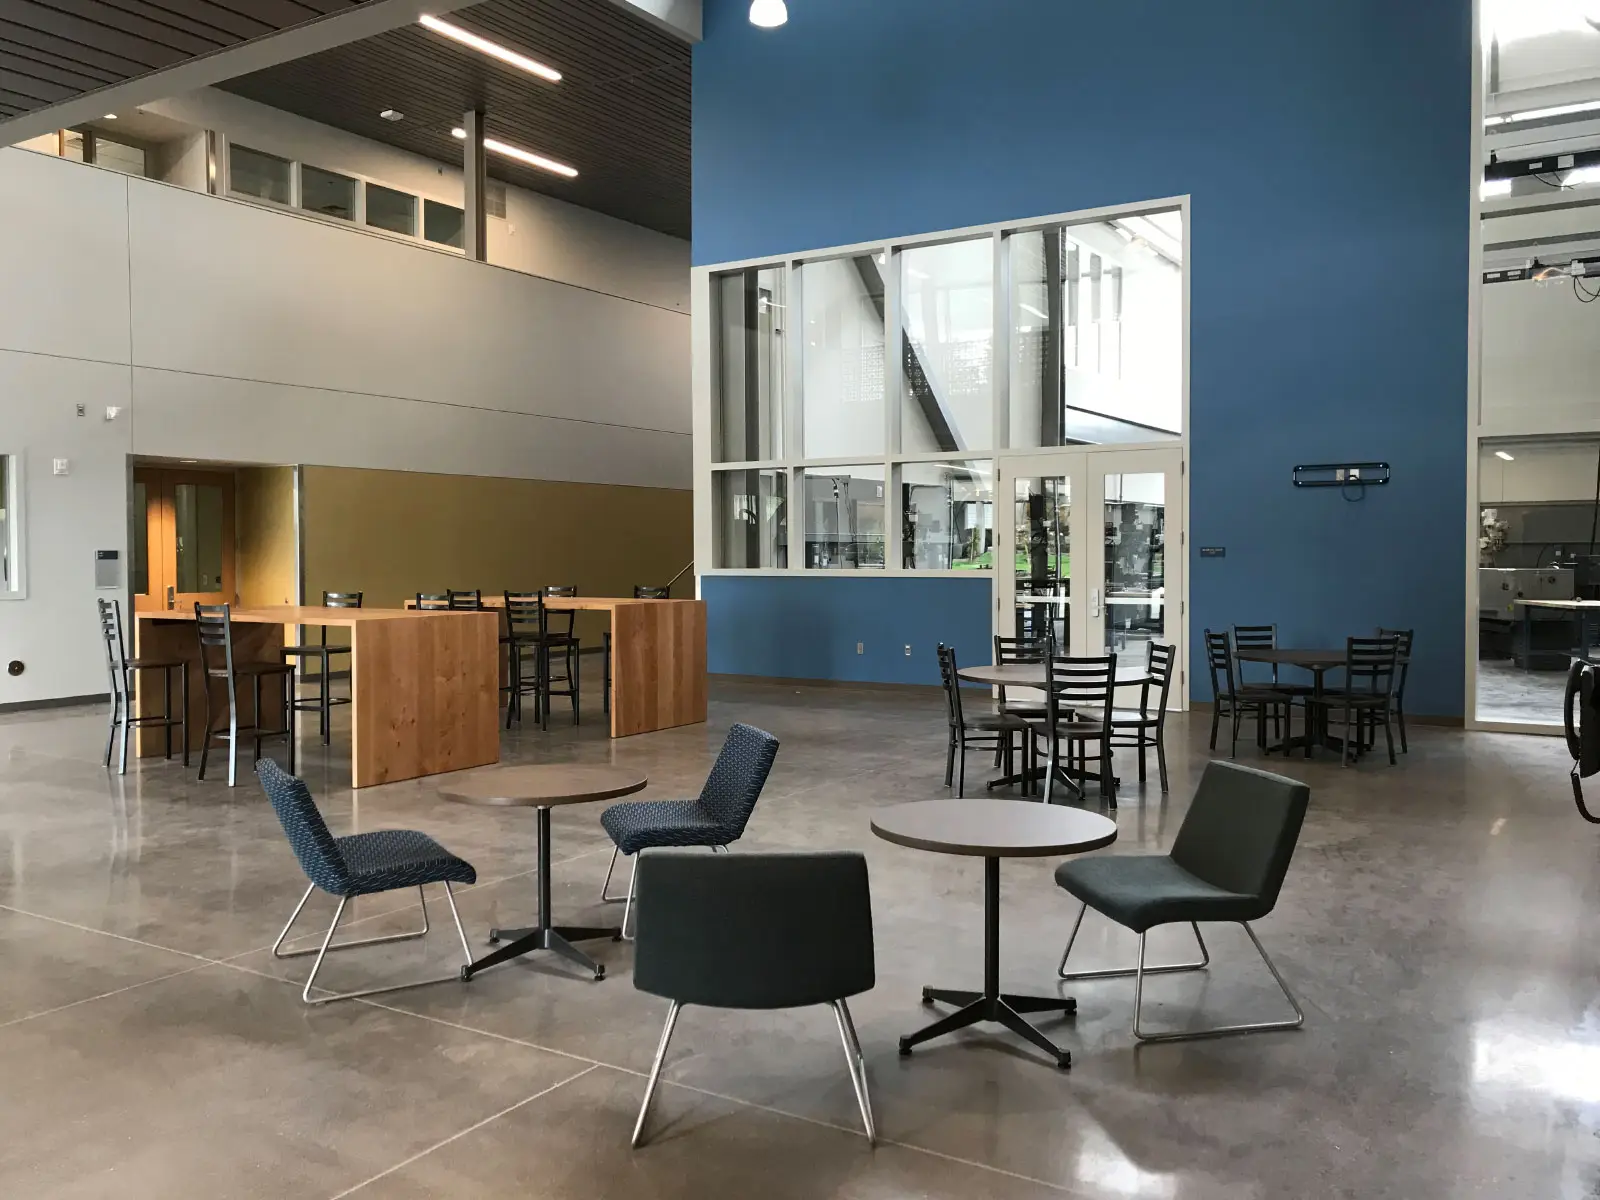 The Industrial Technology Center's lobby, with a vast space, seating and table areas, at the Oregon City campus